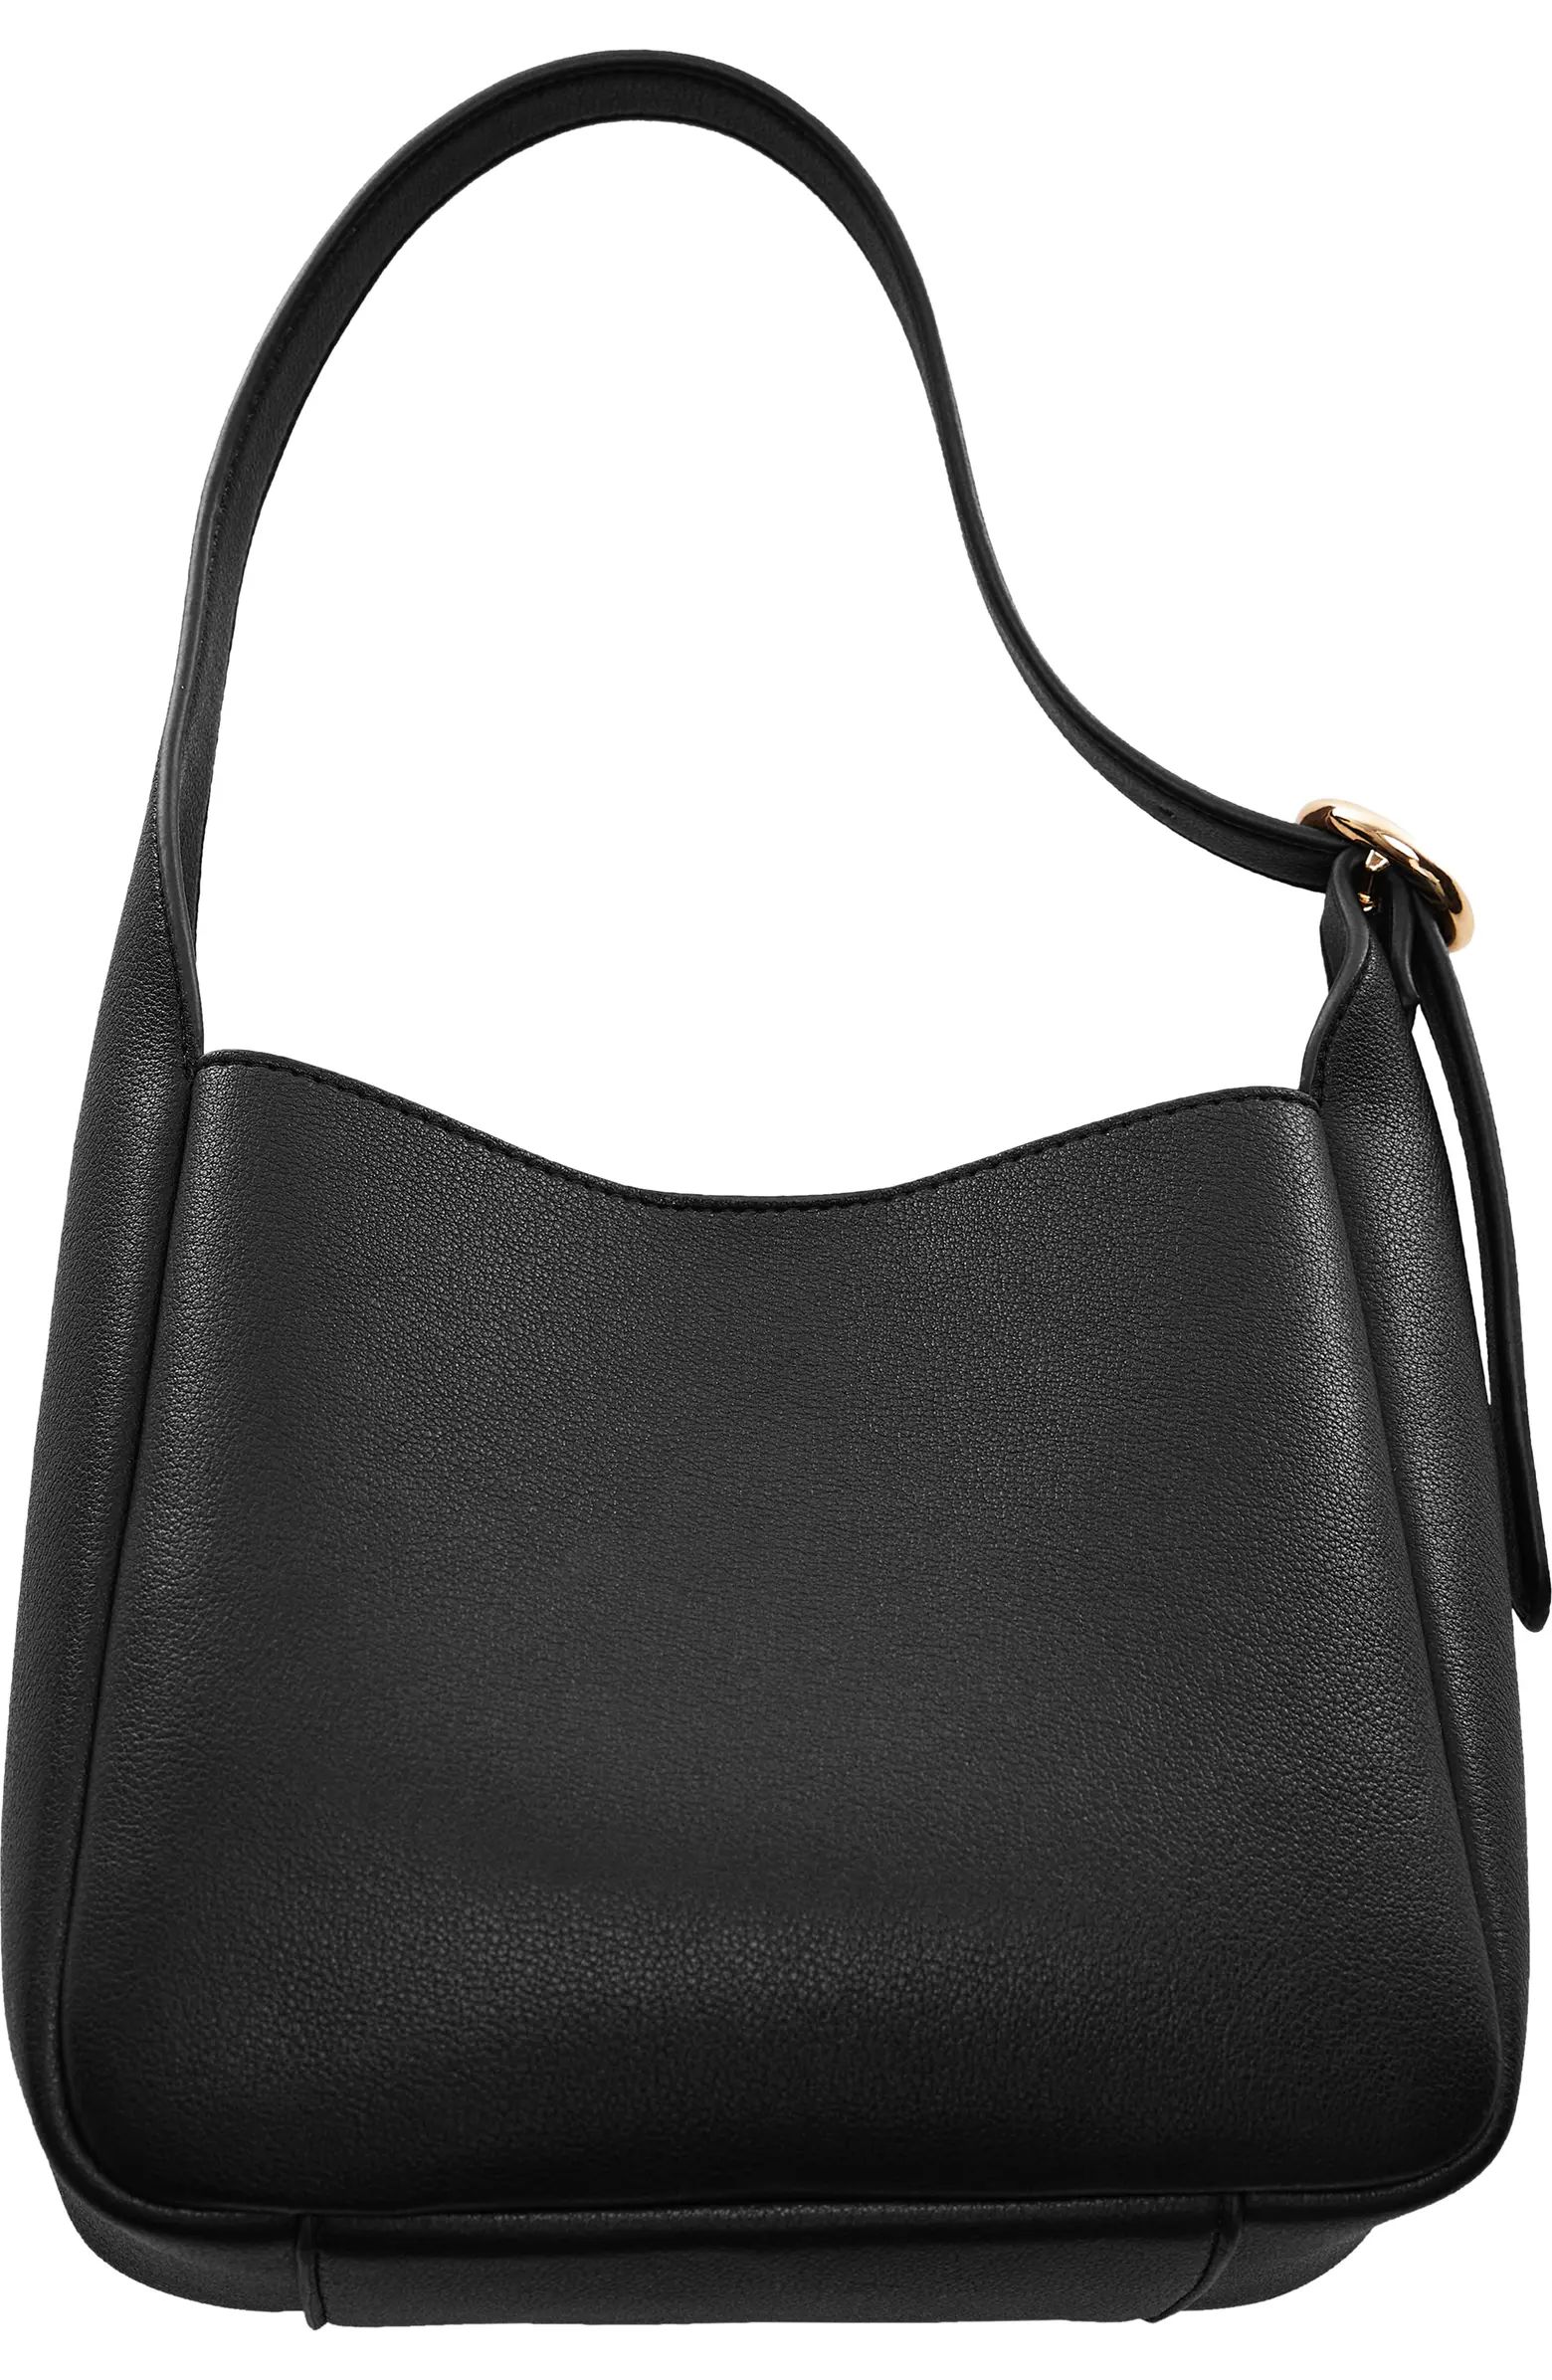 Statement Buckle Faux Leather Hobo Bag | Nordstrom